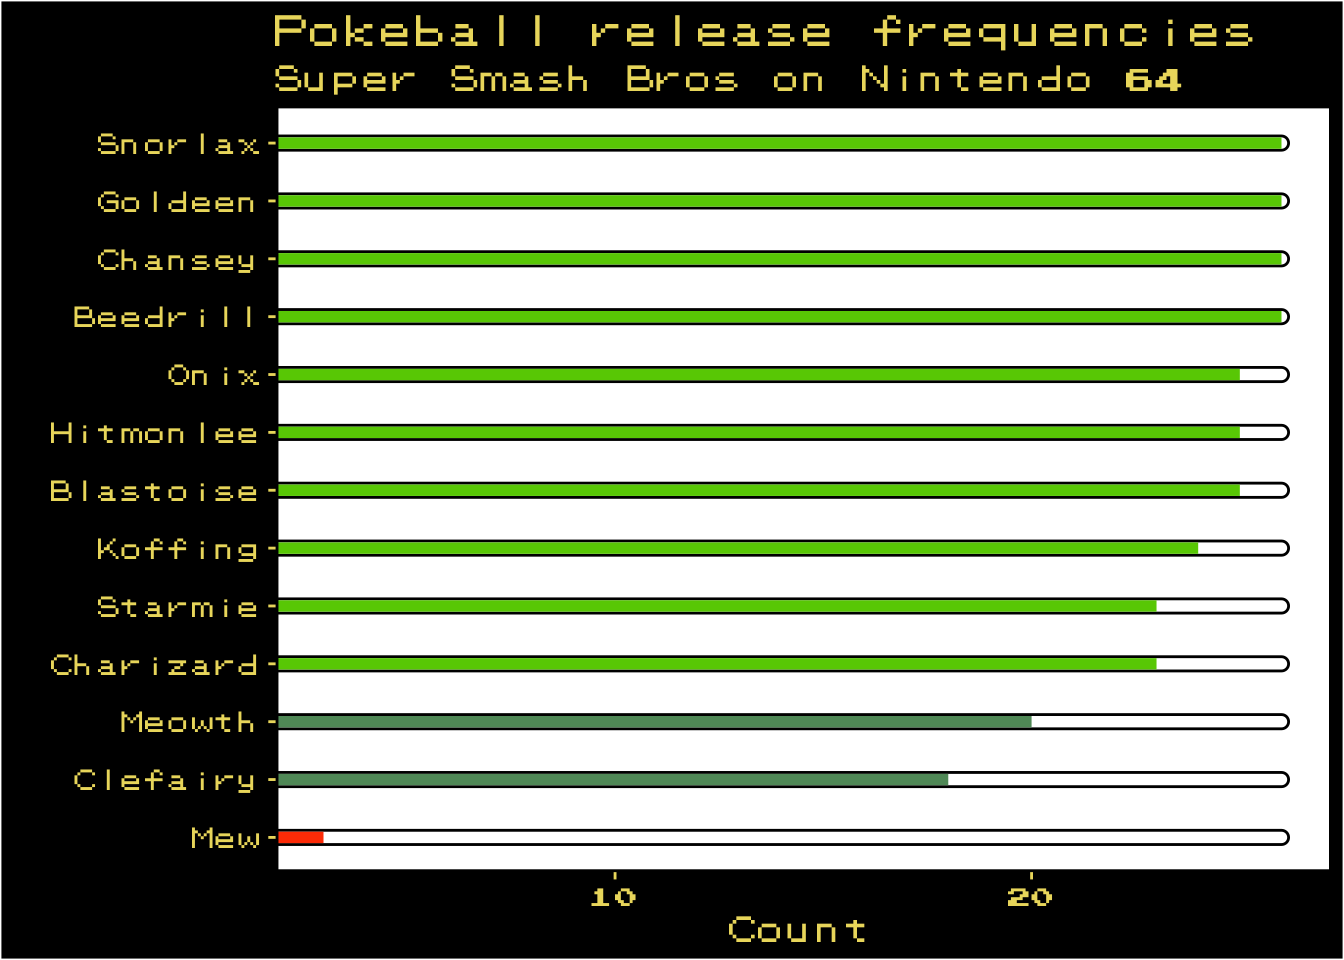 Bar plot of the number of appearances by Pokémon from the pokéball item in Super Smash Bros for the N64. Snorlax, Goldeen Chansey and Beedrill are most common. Mew is least common. The chart is themed with elements from the original Pokémon game on the Game Boy, including health bars and font.